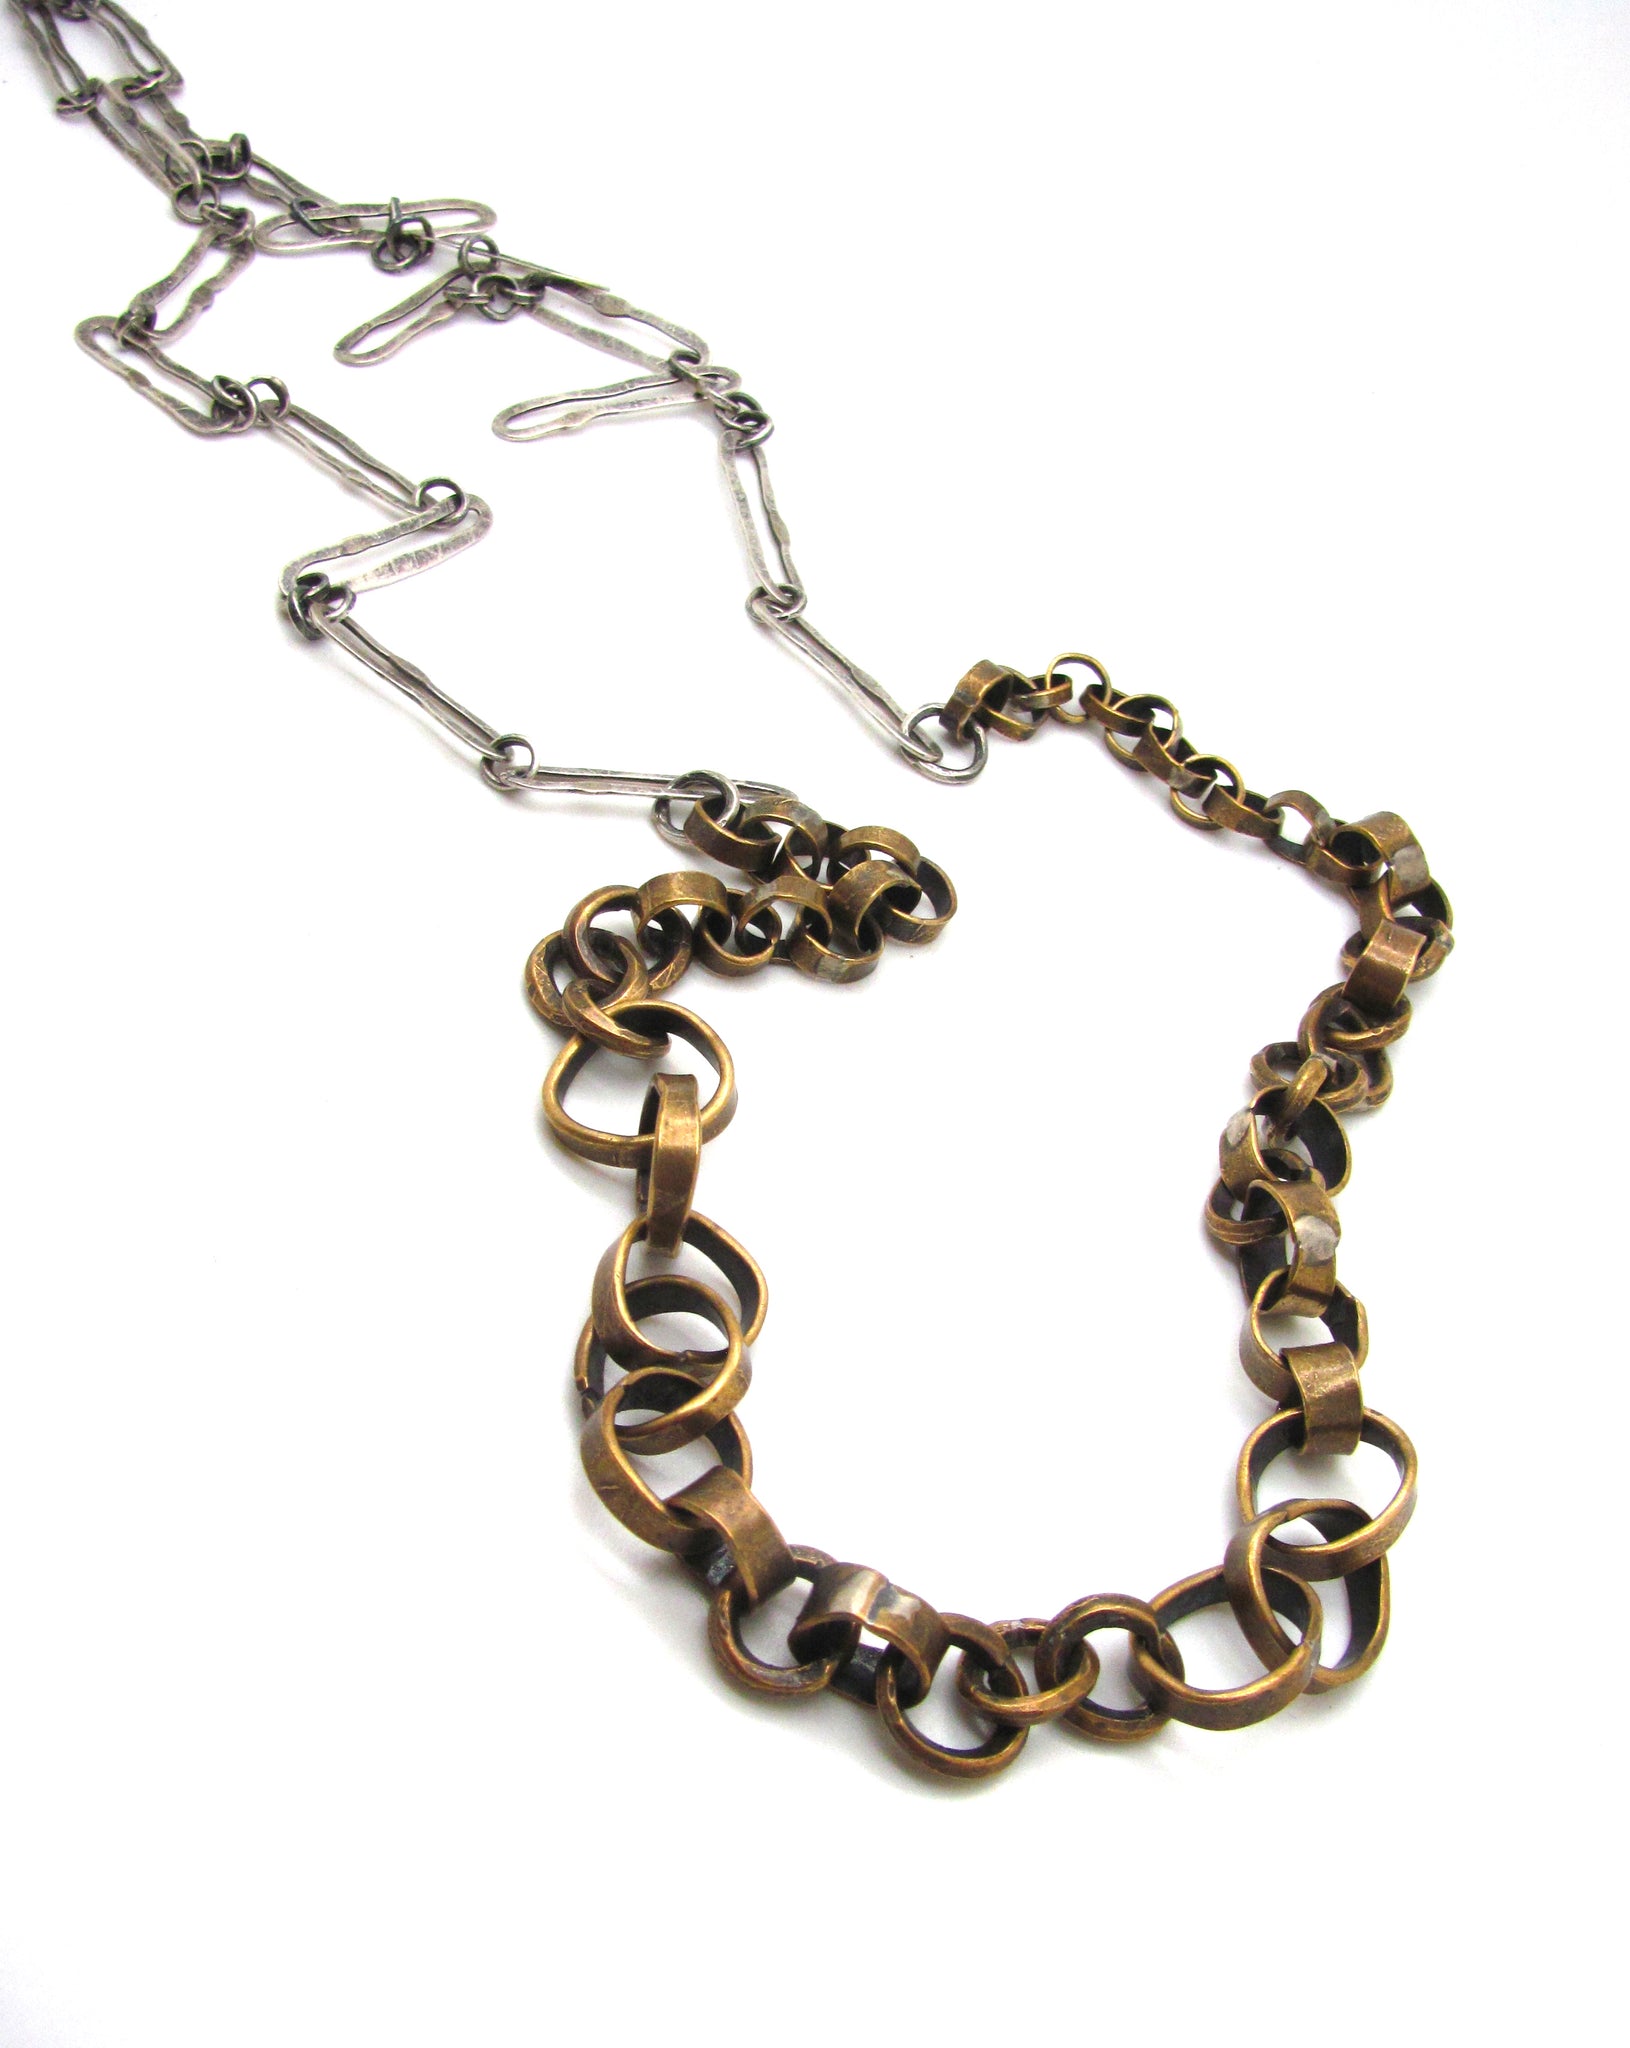 Round and Long Mixed Metals Chain